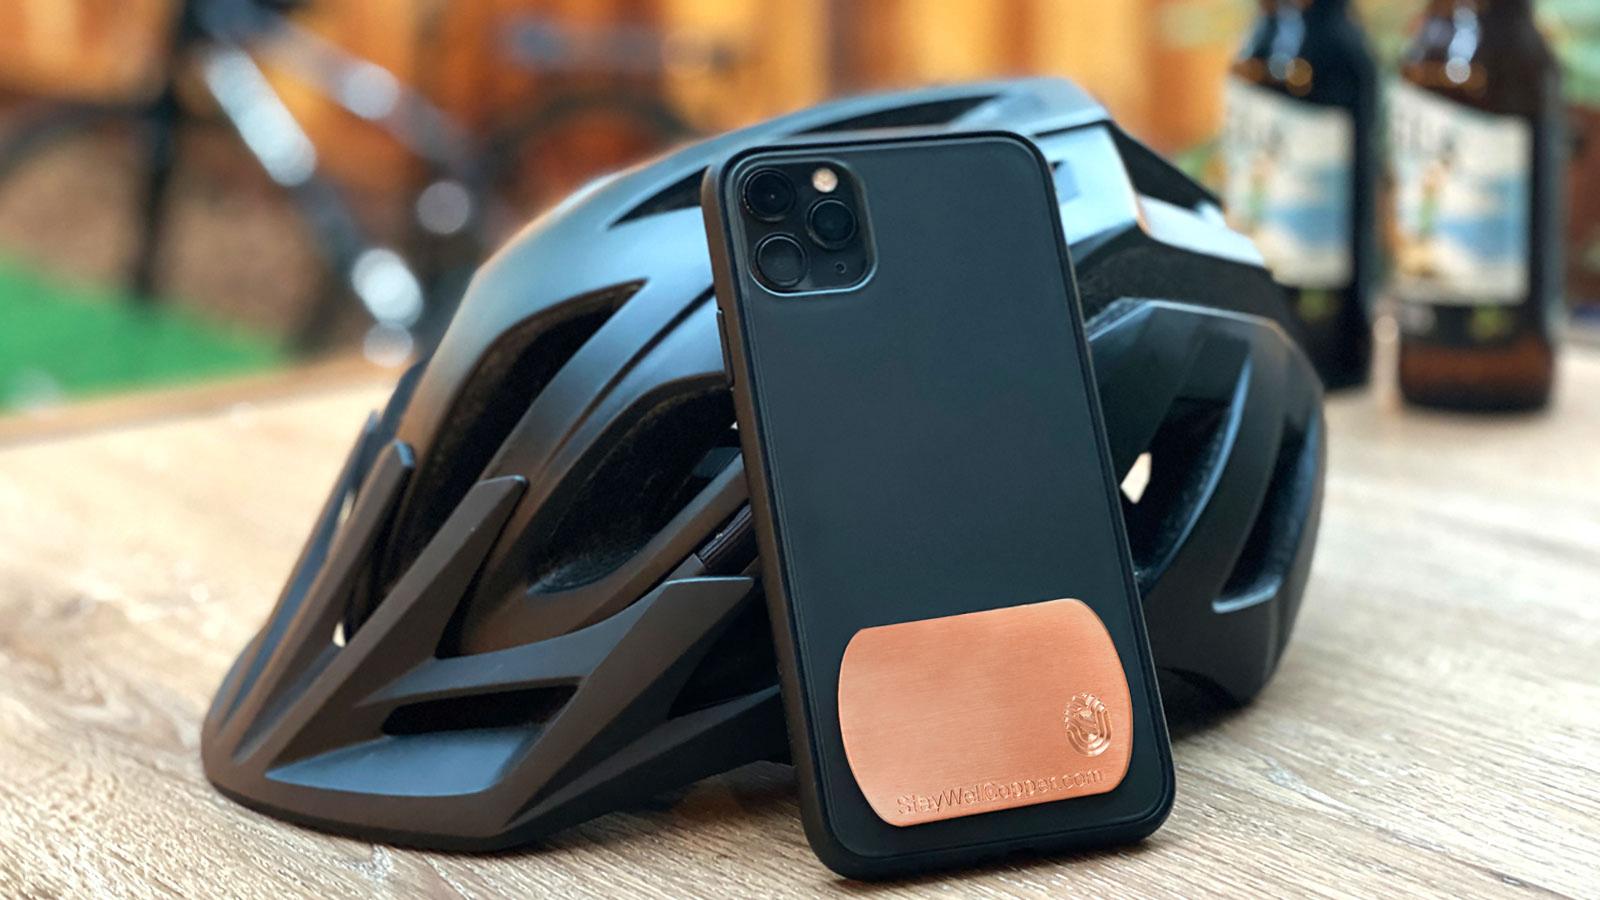 Phone case with 2" x 1.5" Adhesive Phone Patch made in USA from natural antimicrobial copper attaches to germy devices we touch most. Phone case with phone patch shown leaning up against a cyclist helmet. Sanitizers, Chemical Free, Lasts Forever. Recyclable. Kills 99.9% of Harmful Bacteria. EPA registered.